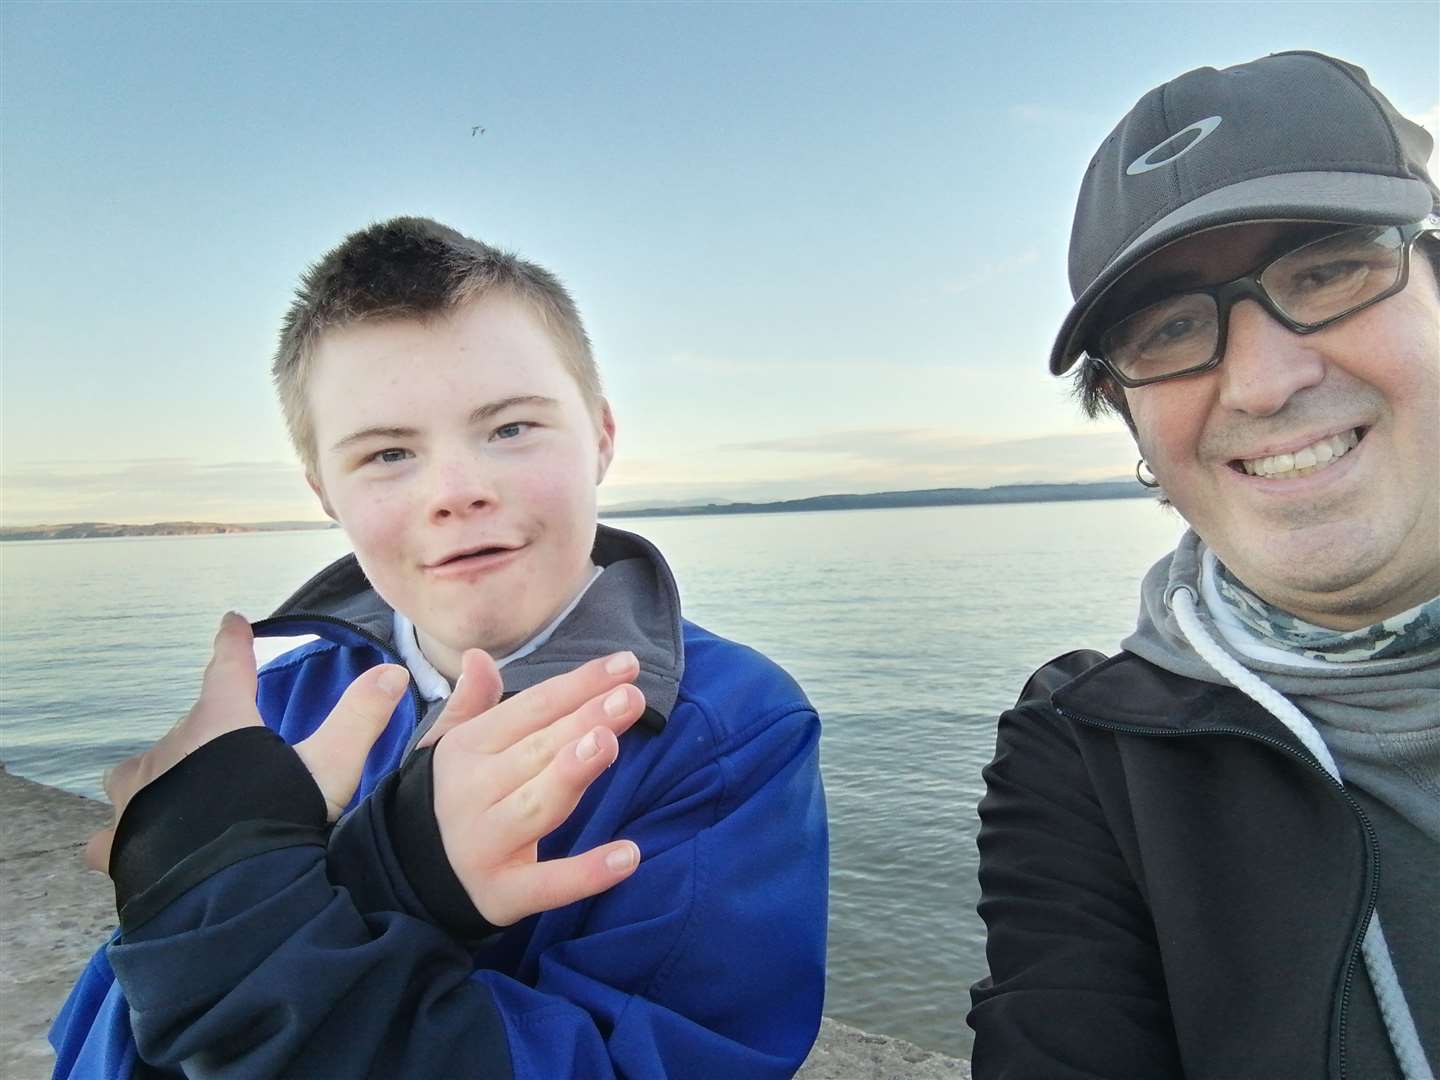 Finlay McKenzie on a day at the seaside with support worker Jon Lane